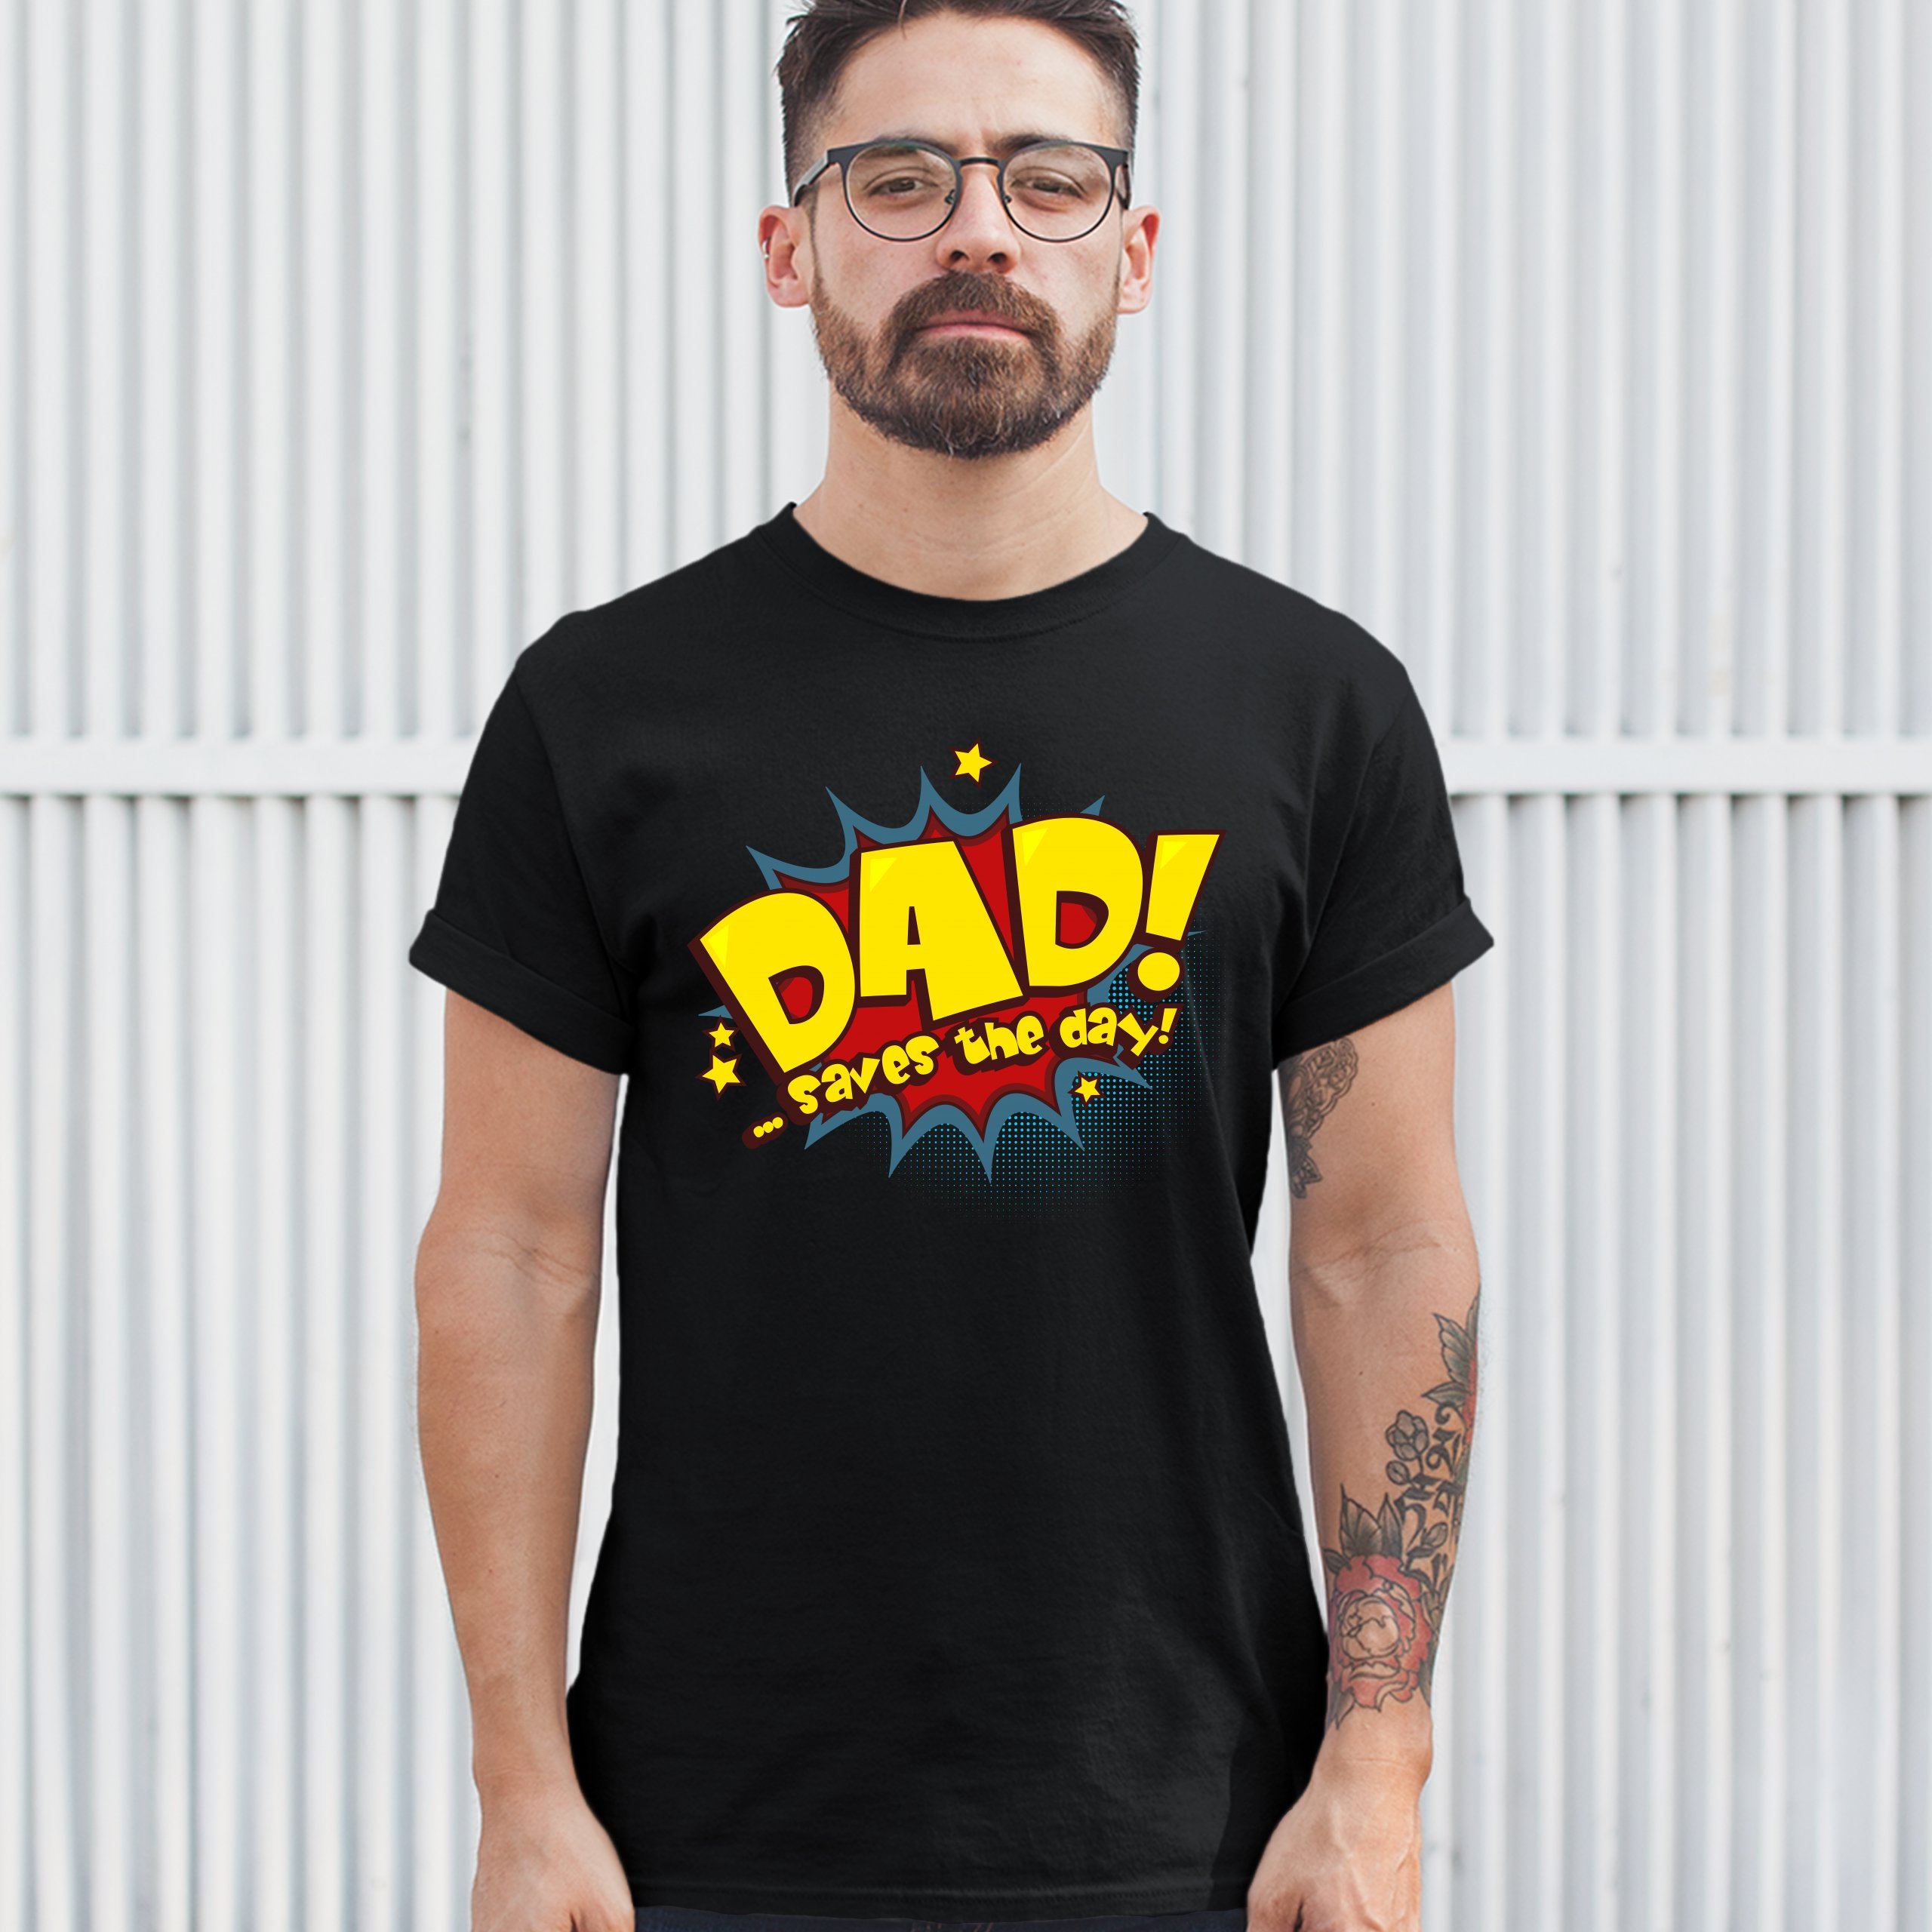 Dad Saves the Day T-shirt Happy Father's Day Greatest | Etsy